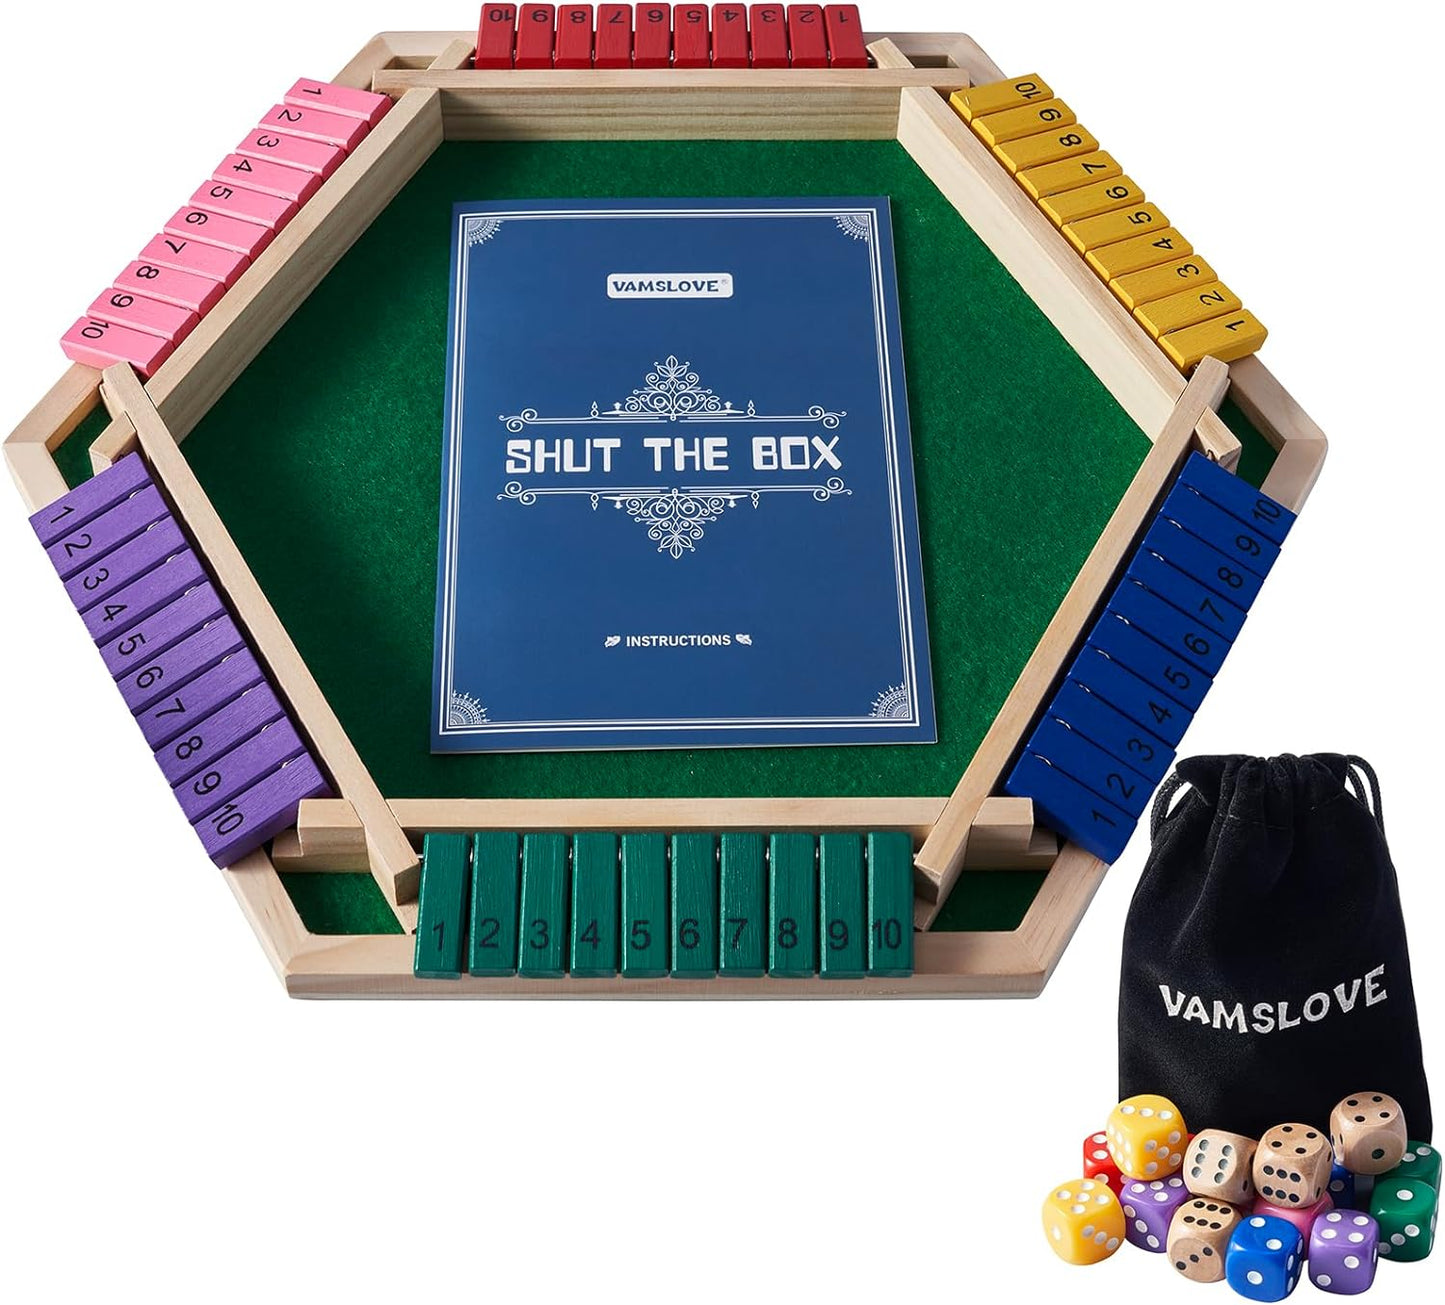 Shut the Box Game for 6 Player with 12+4 Dice - Colorful 6 Sided Wooden Board Math Number Games for Kids Adults Families Party Club (Instructions Included)